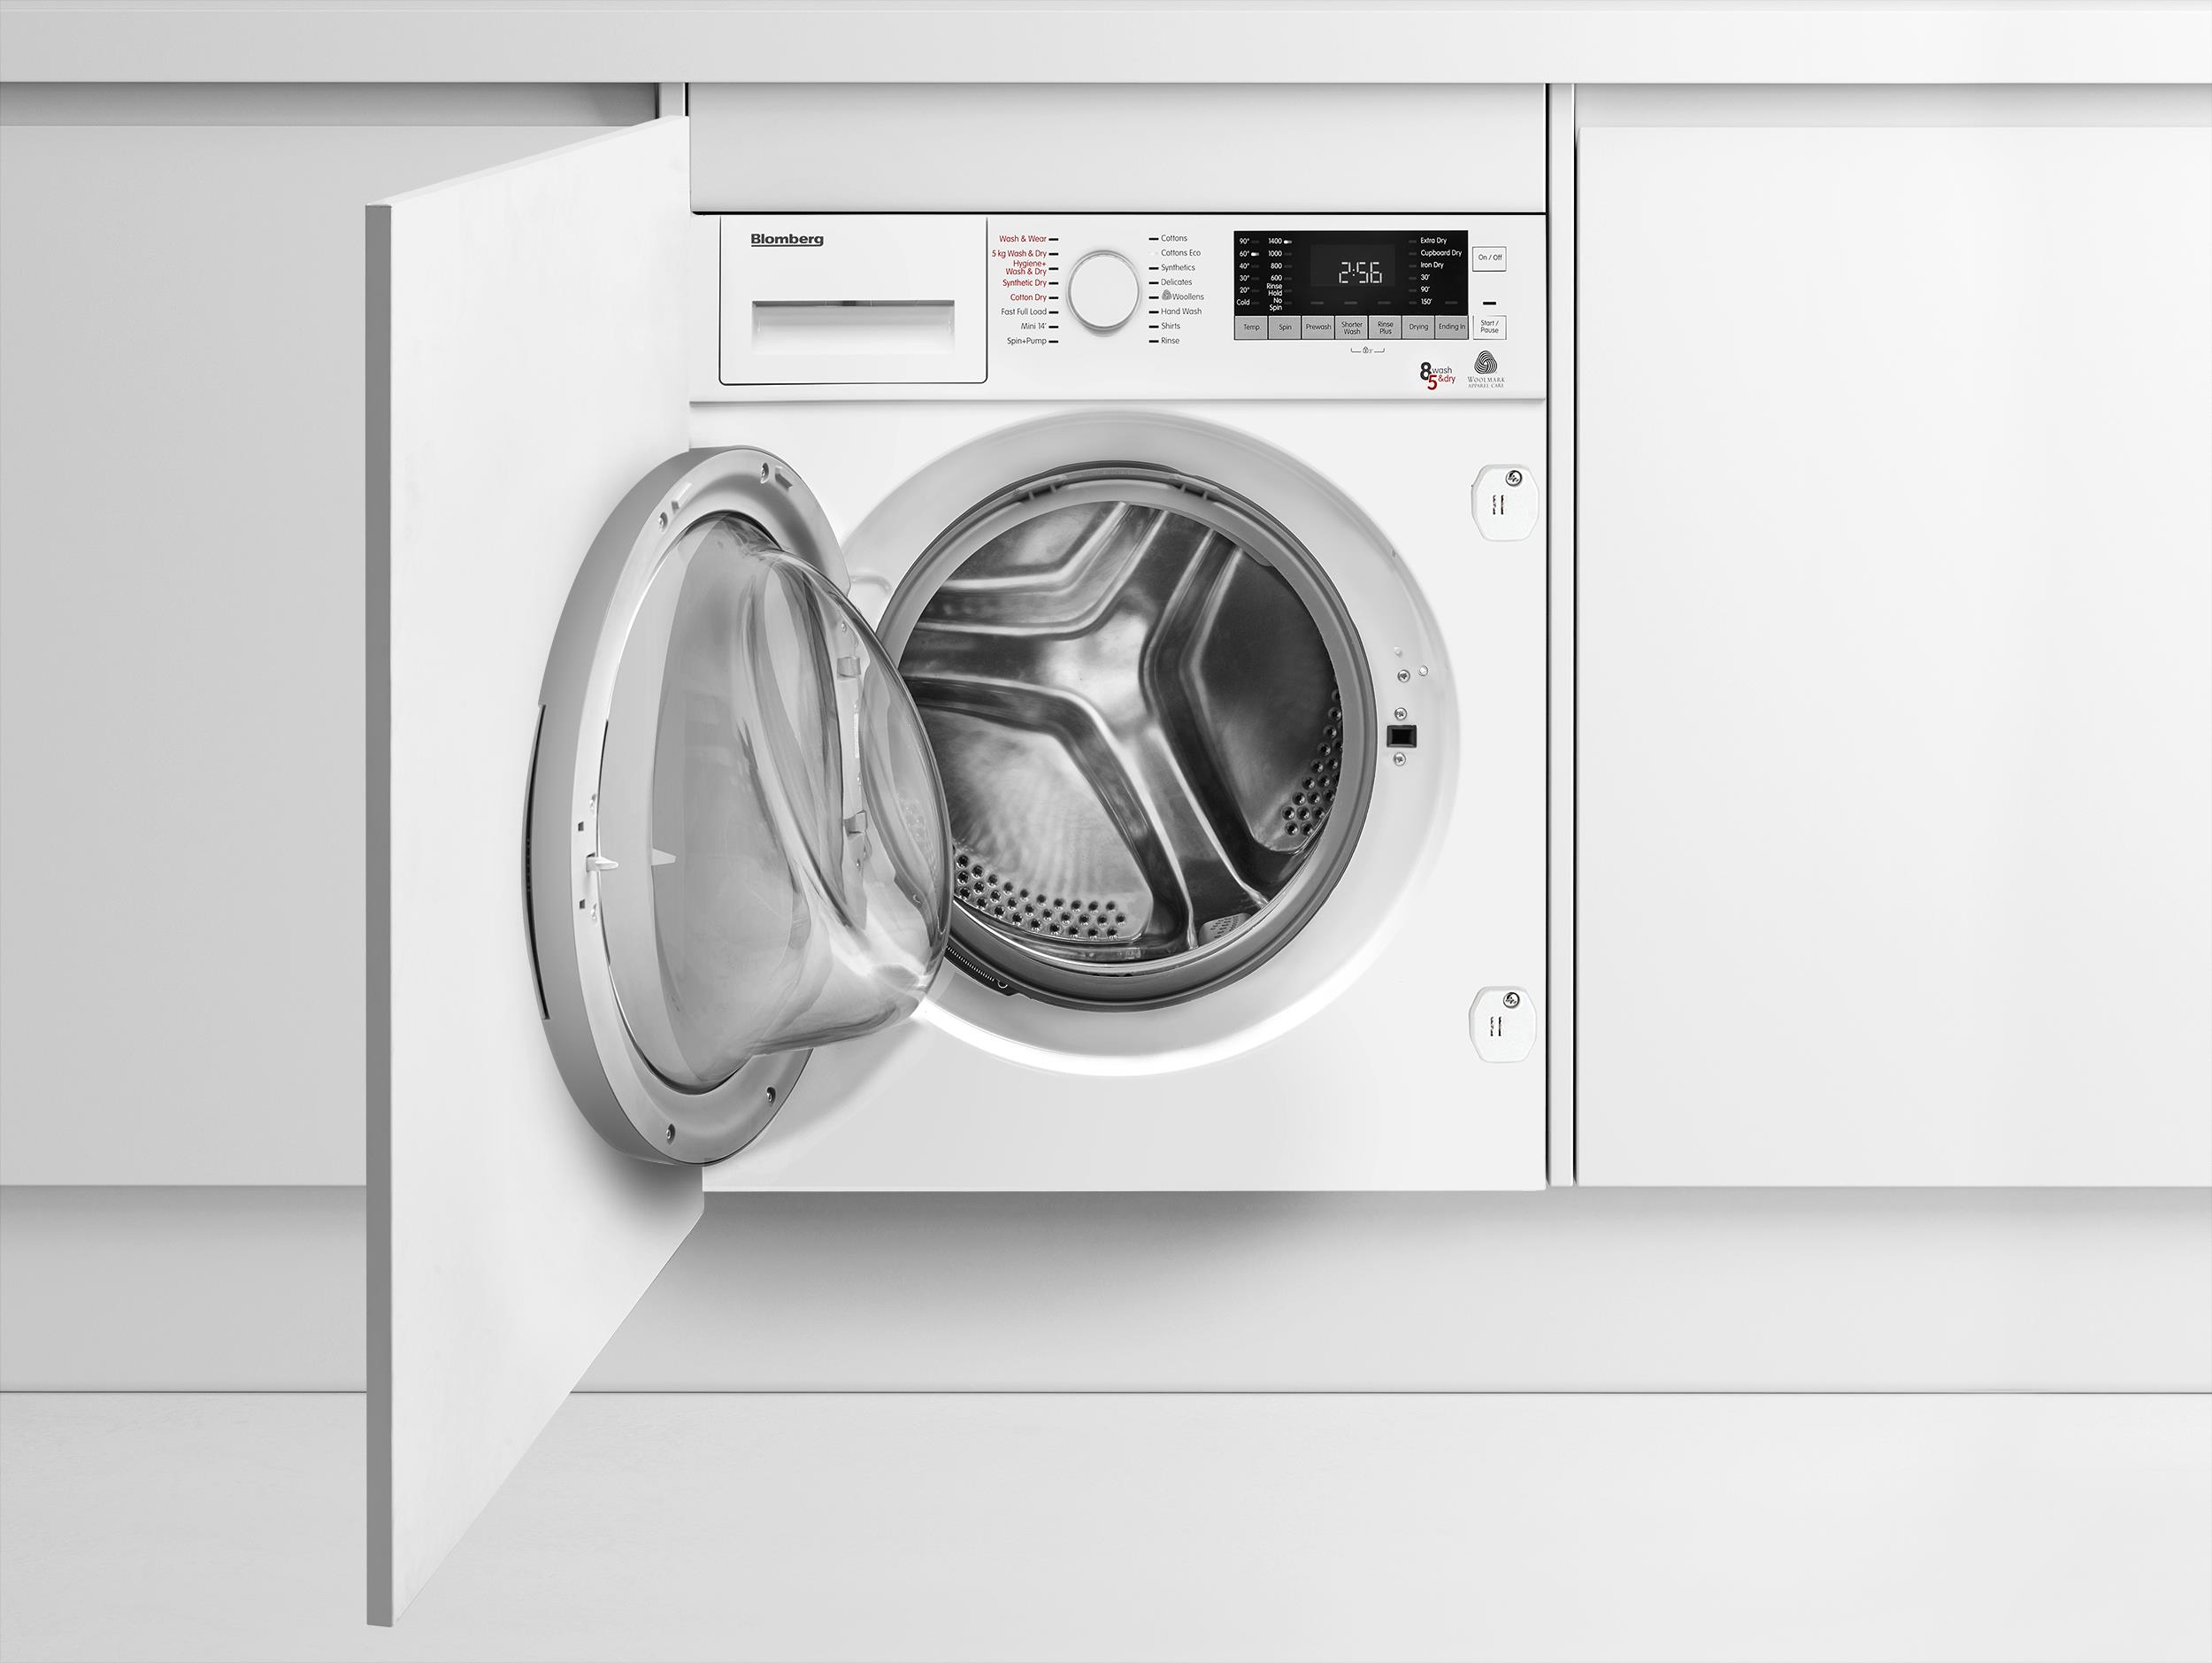 lri285410-integrated-washer-dryer-with-8kg-5kg-capacity